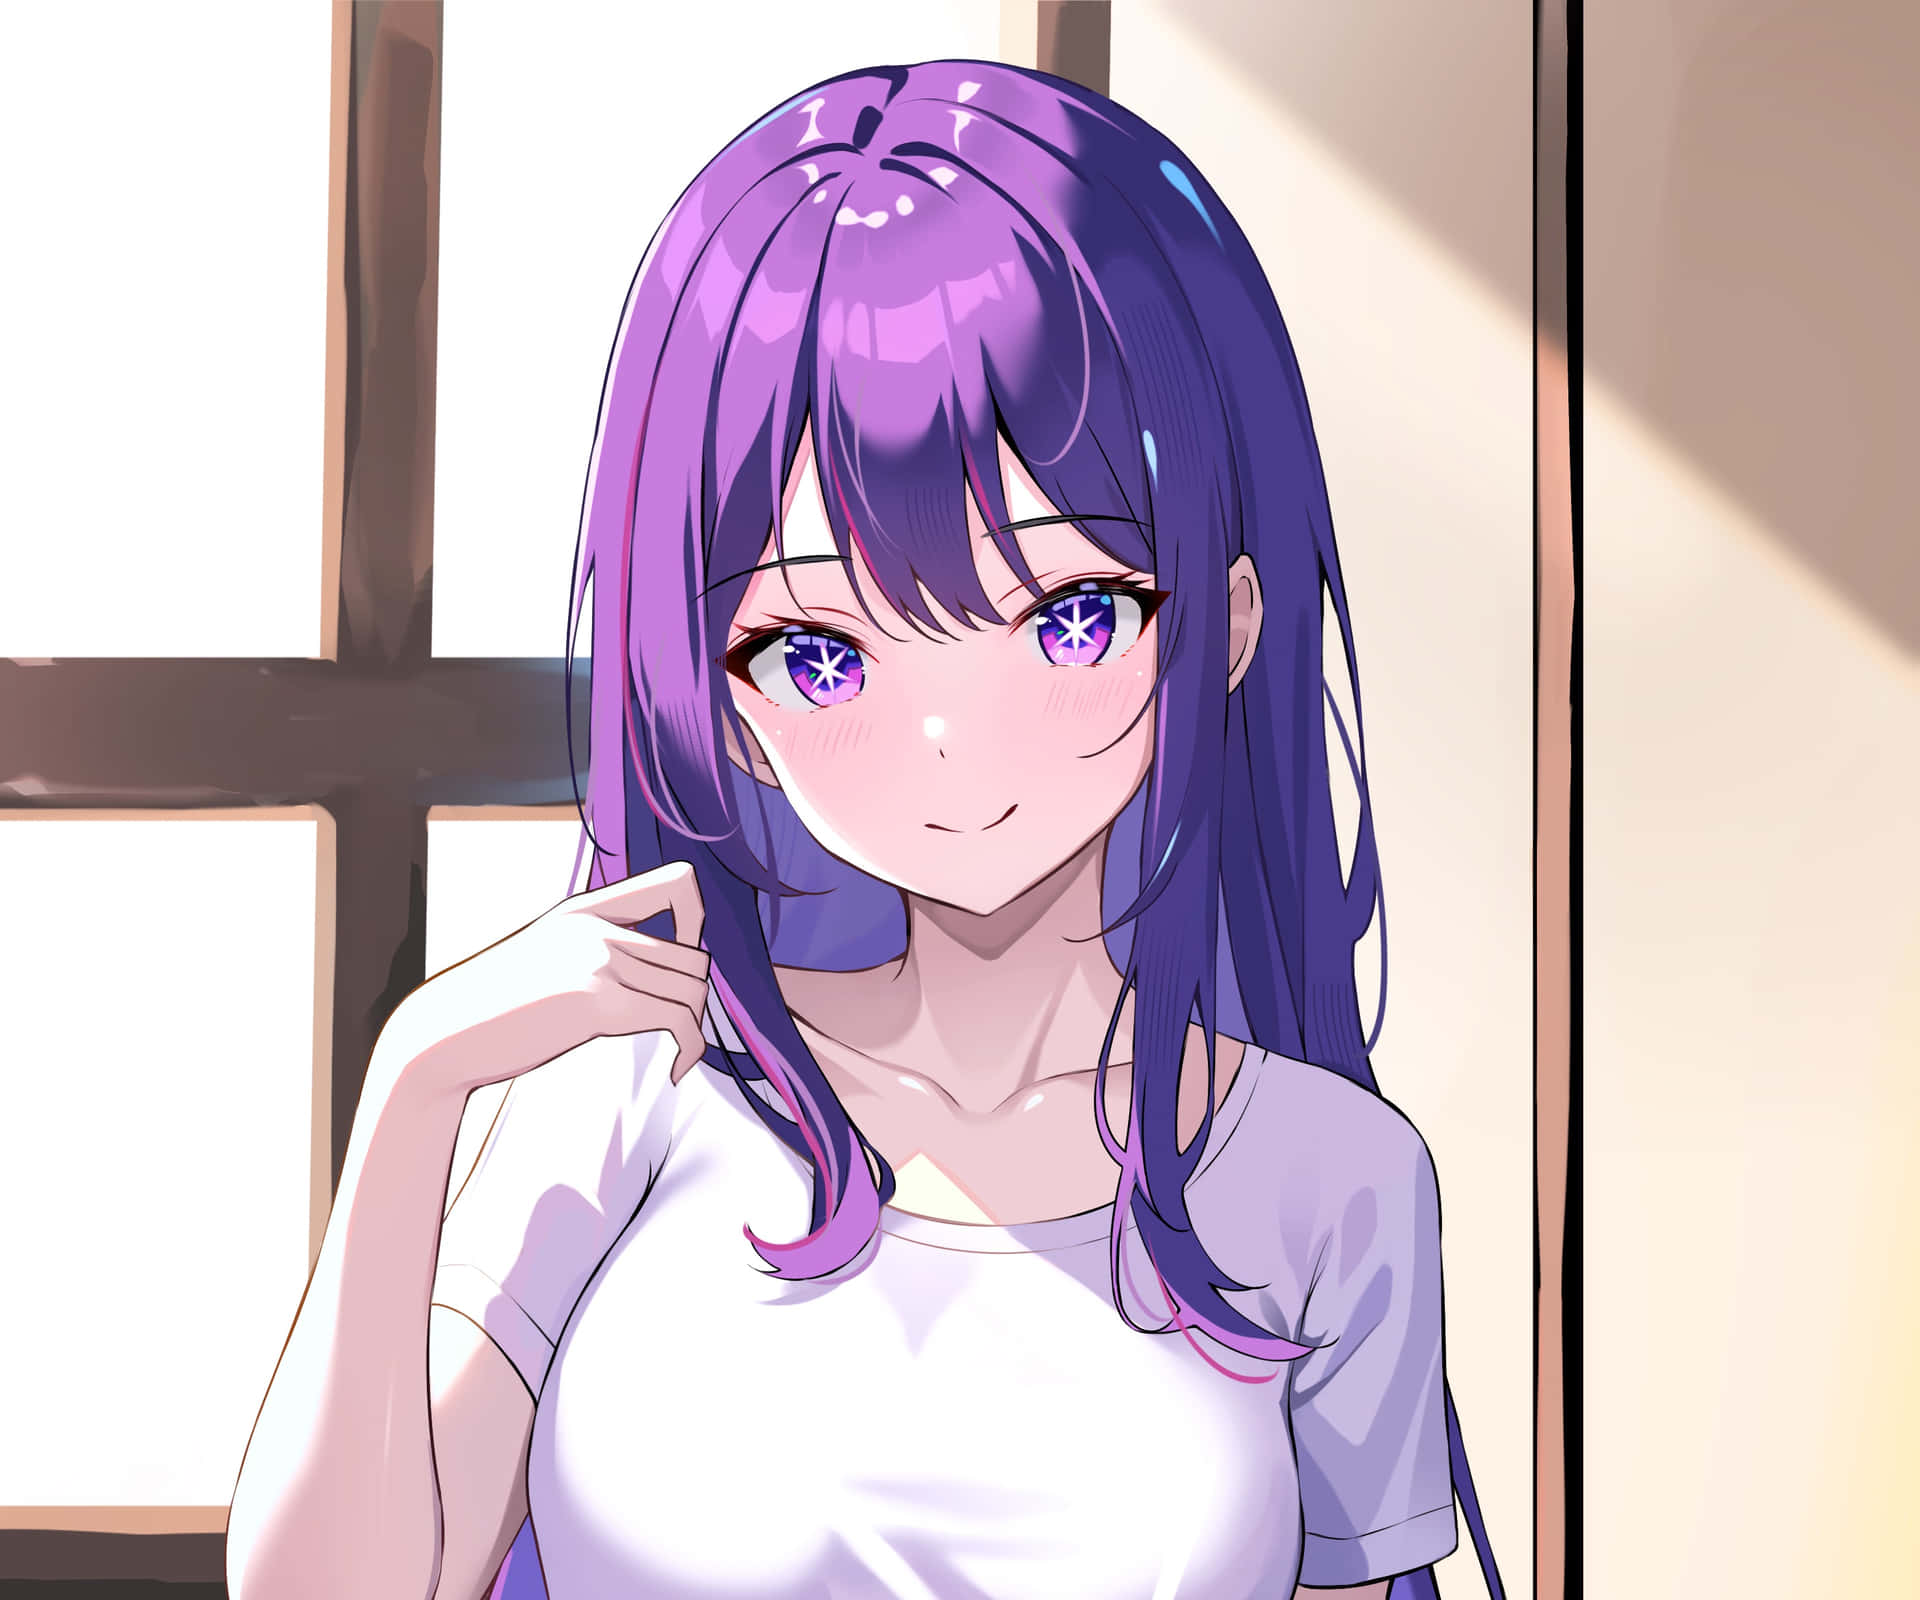 Purple Haired Anime Girl Smiling By Window Wallpaper